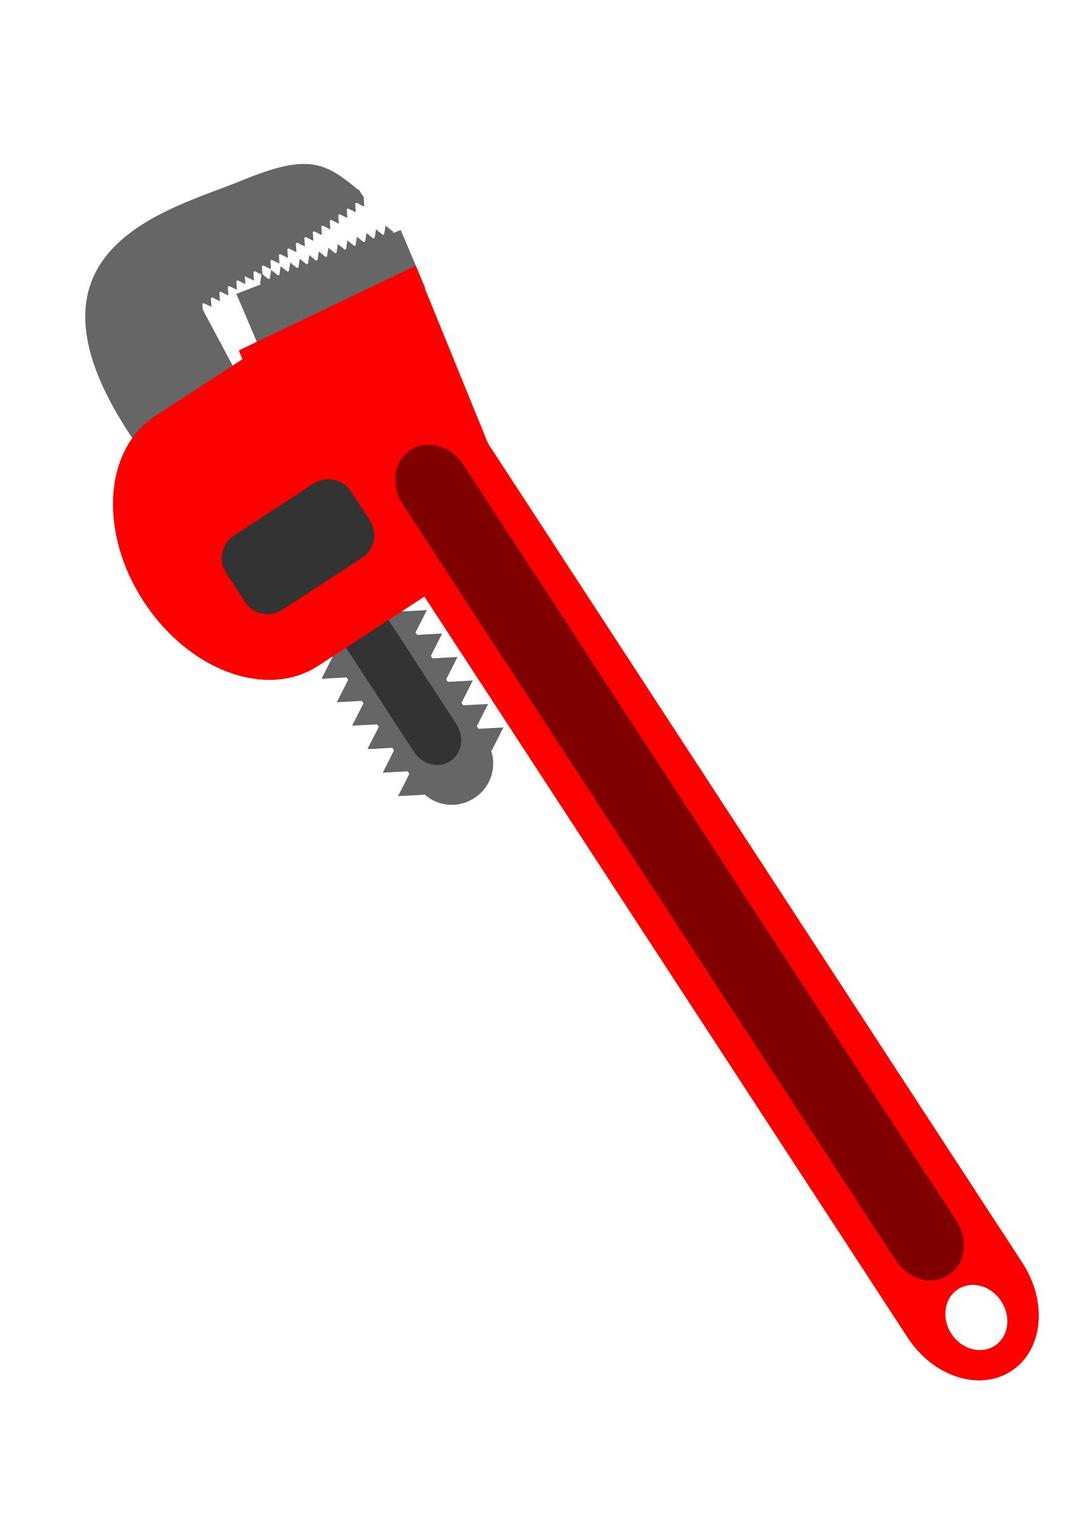 Plumbers Wrench png transparent